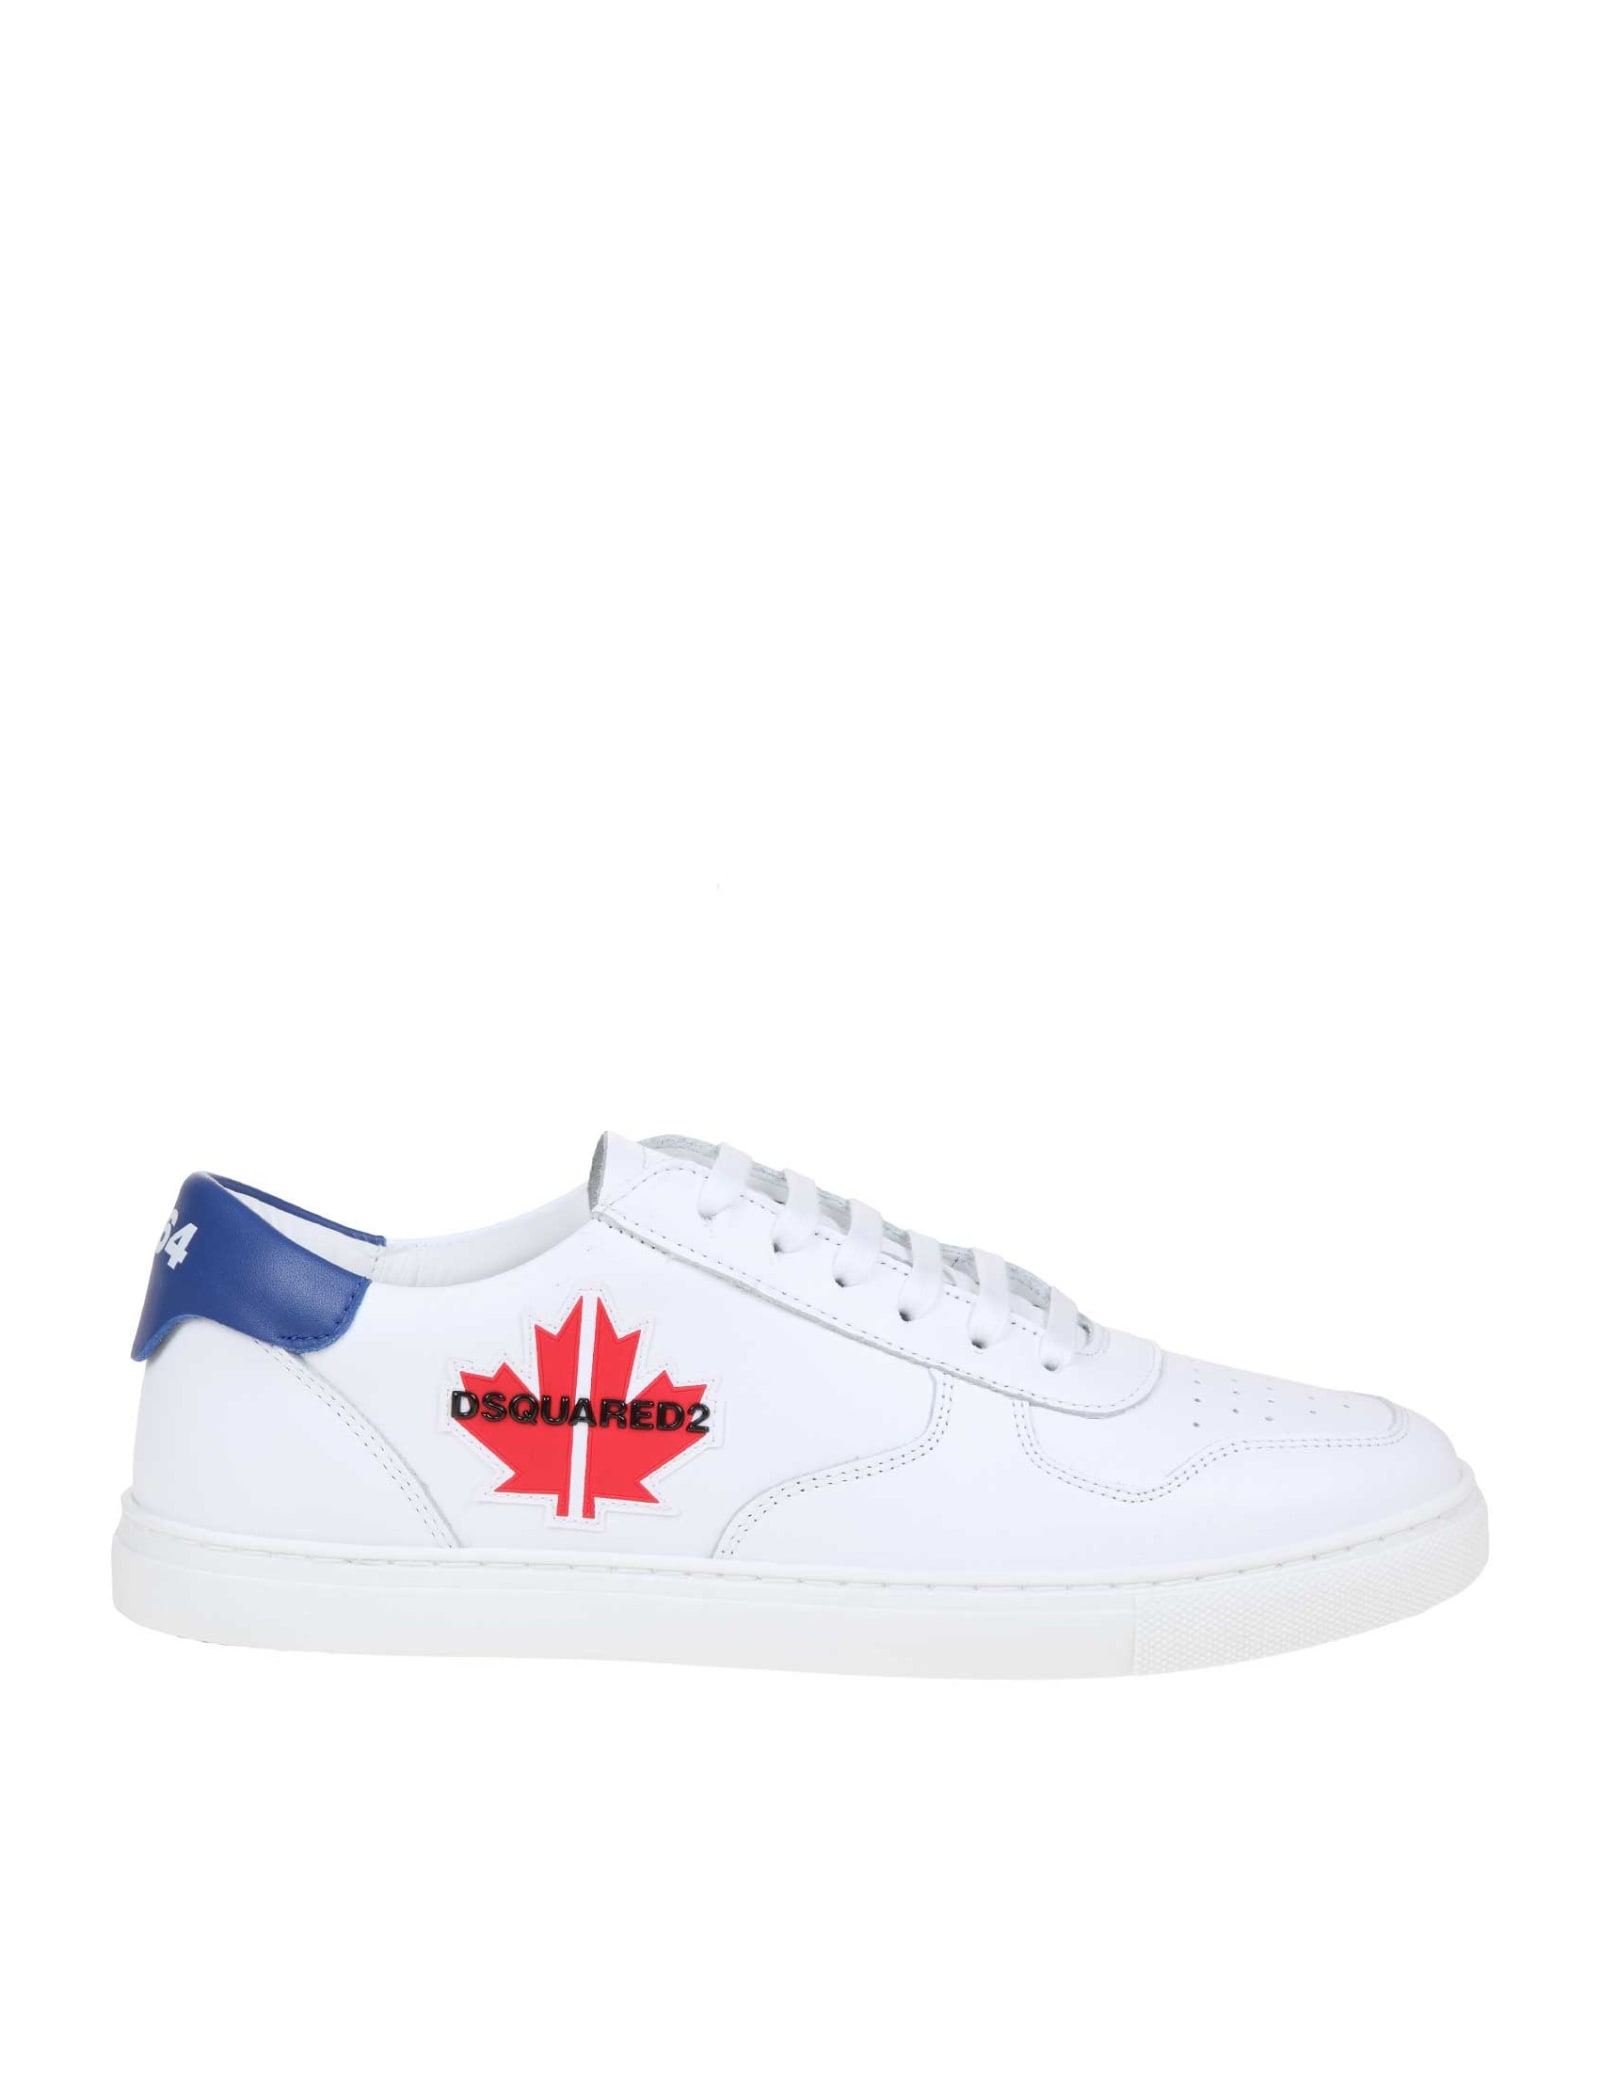 DSQUARED2 MAPLE GYM SNEAKERS IN WHITE LEATHER,11247312